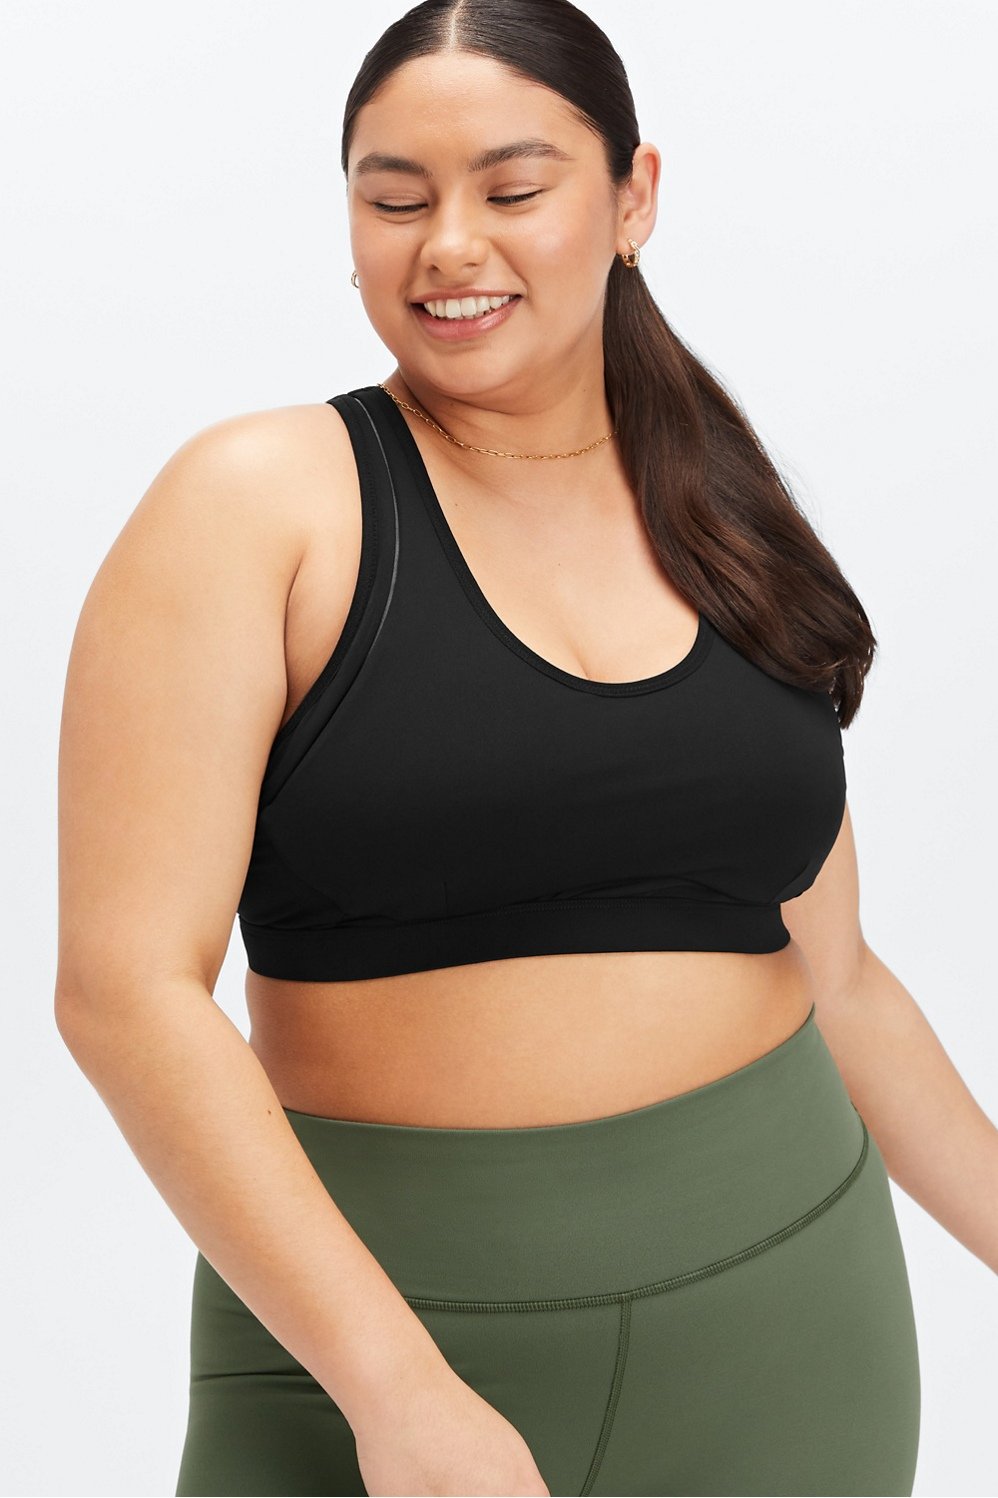 Forlest - Velcro® sports bra will be your fave.🥳✨#veclro